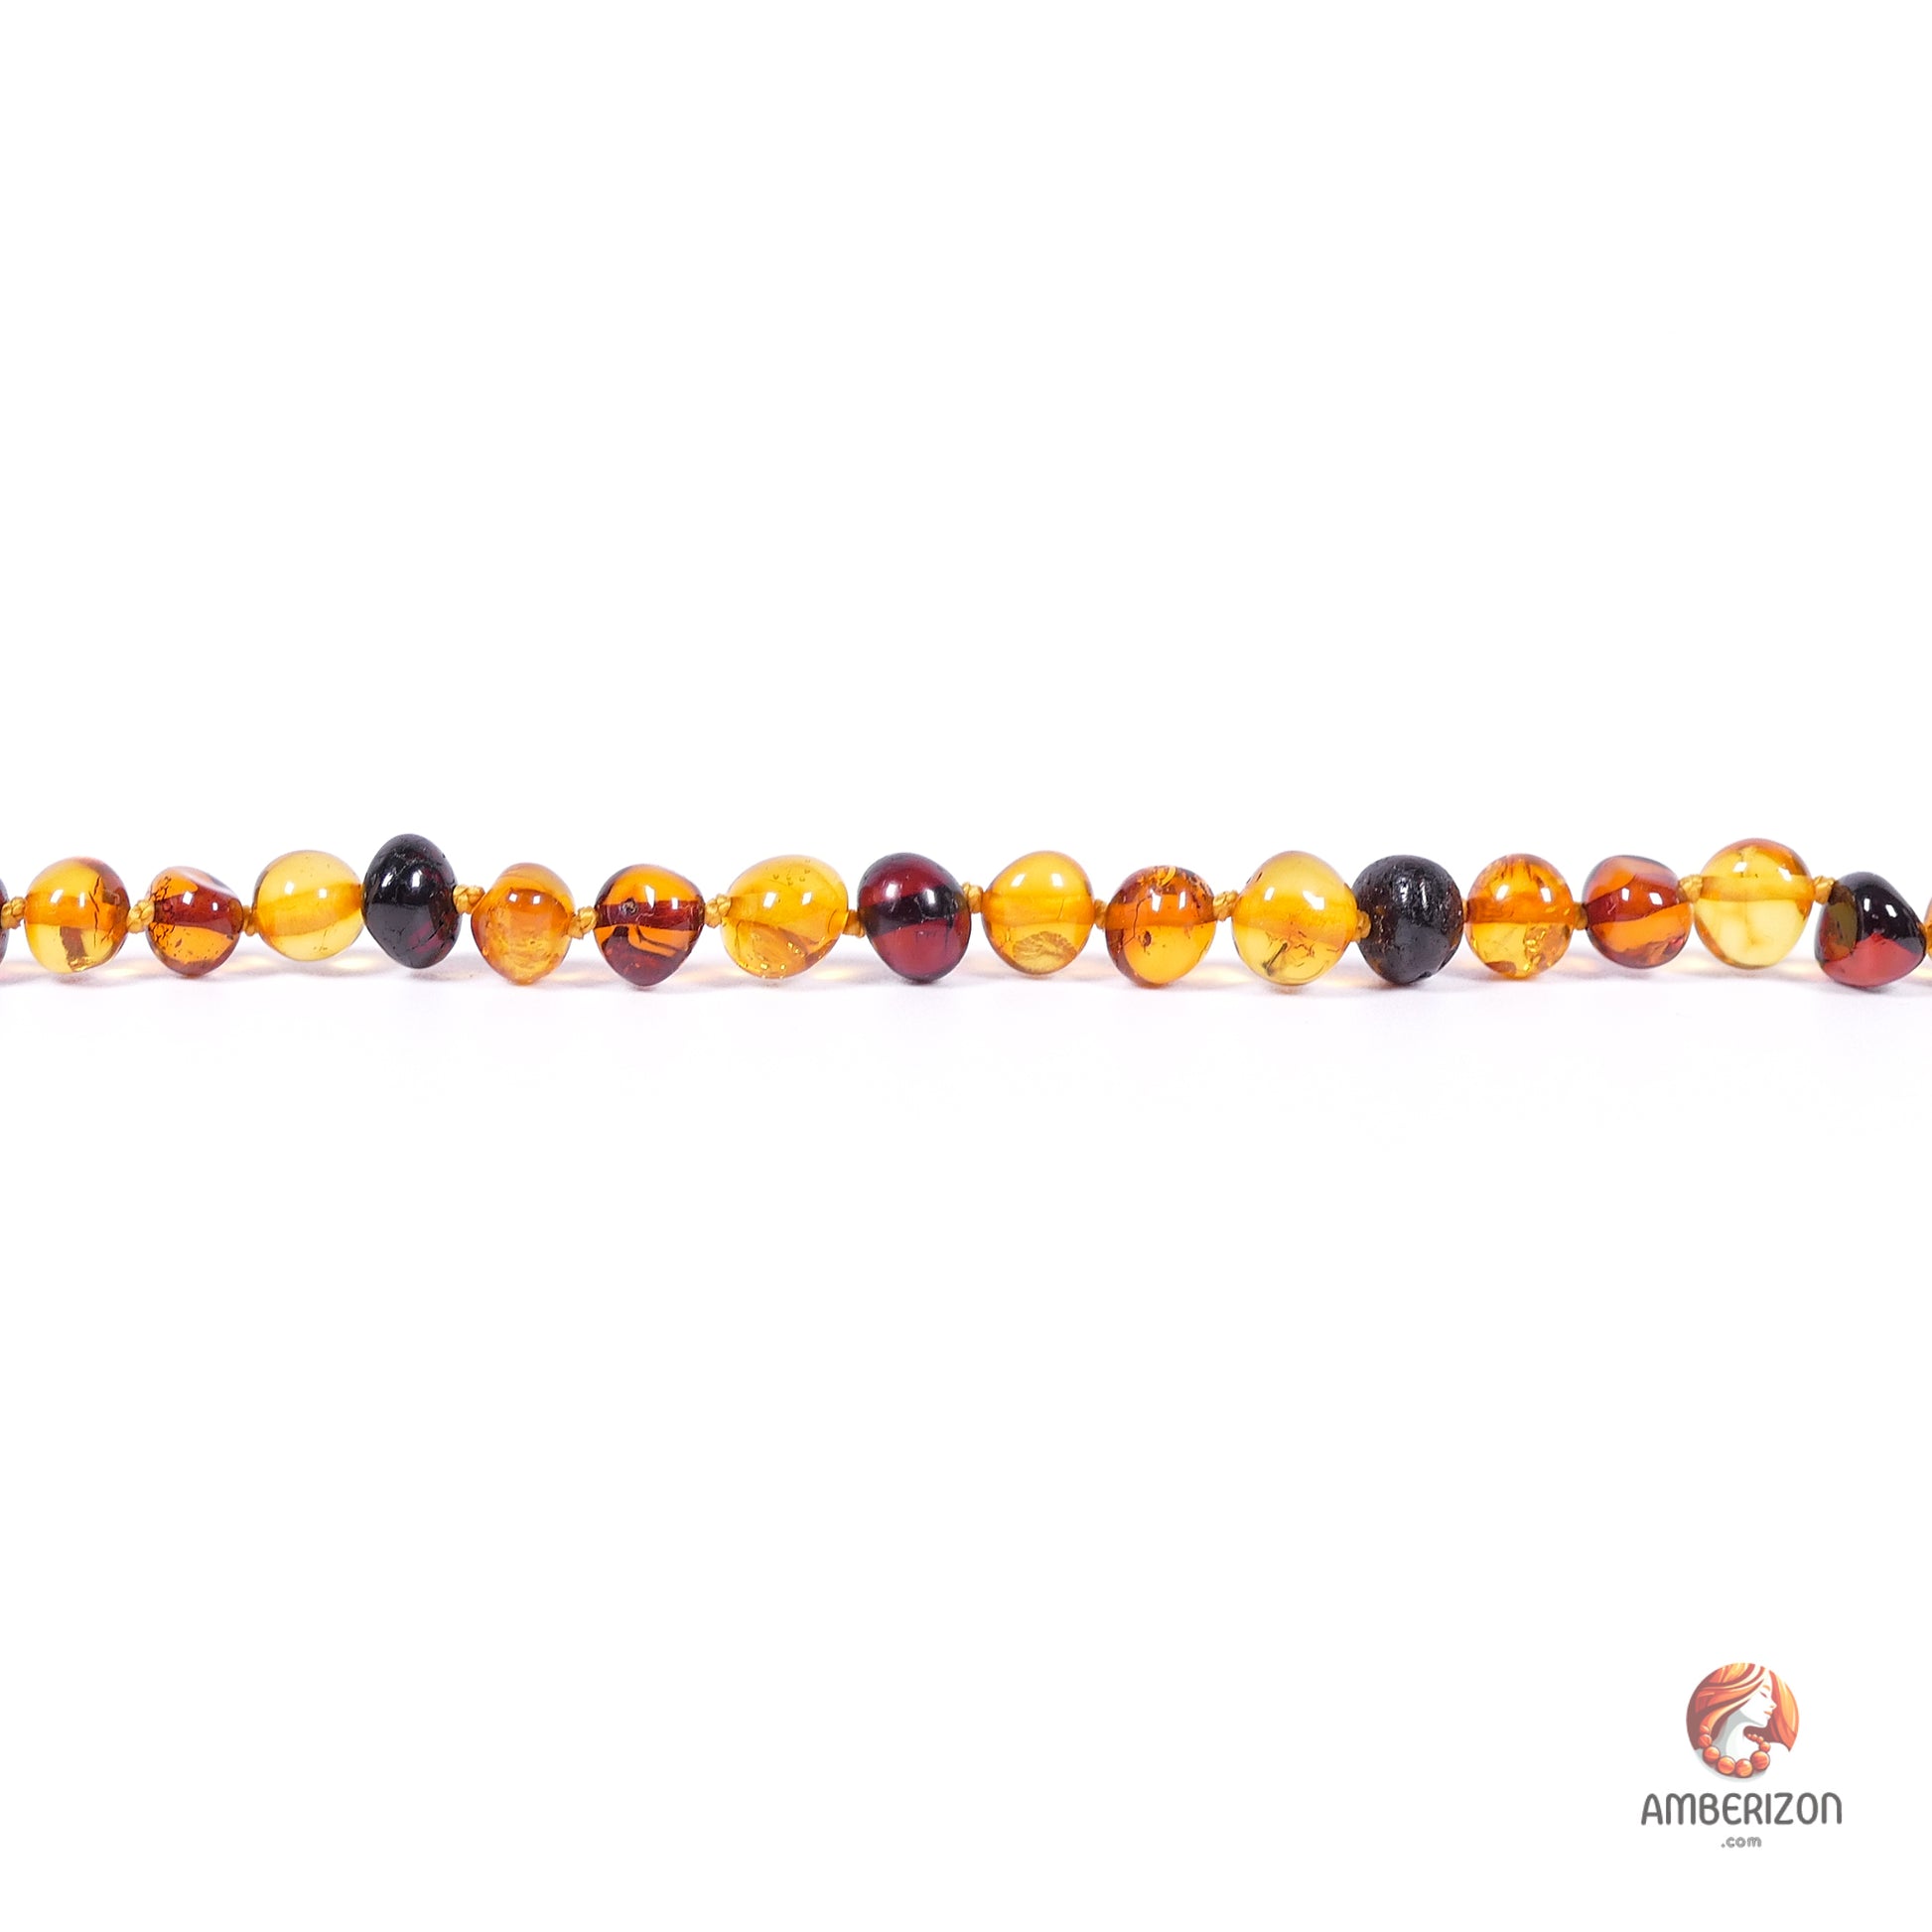 Contemporary Unisex Amber Necklace - 47cm Length, Everyday Wear